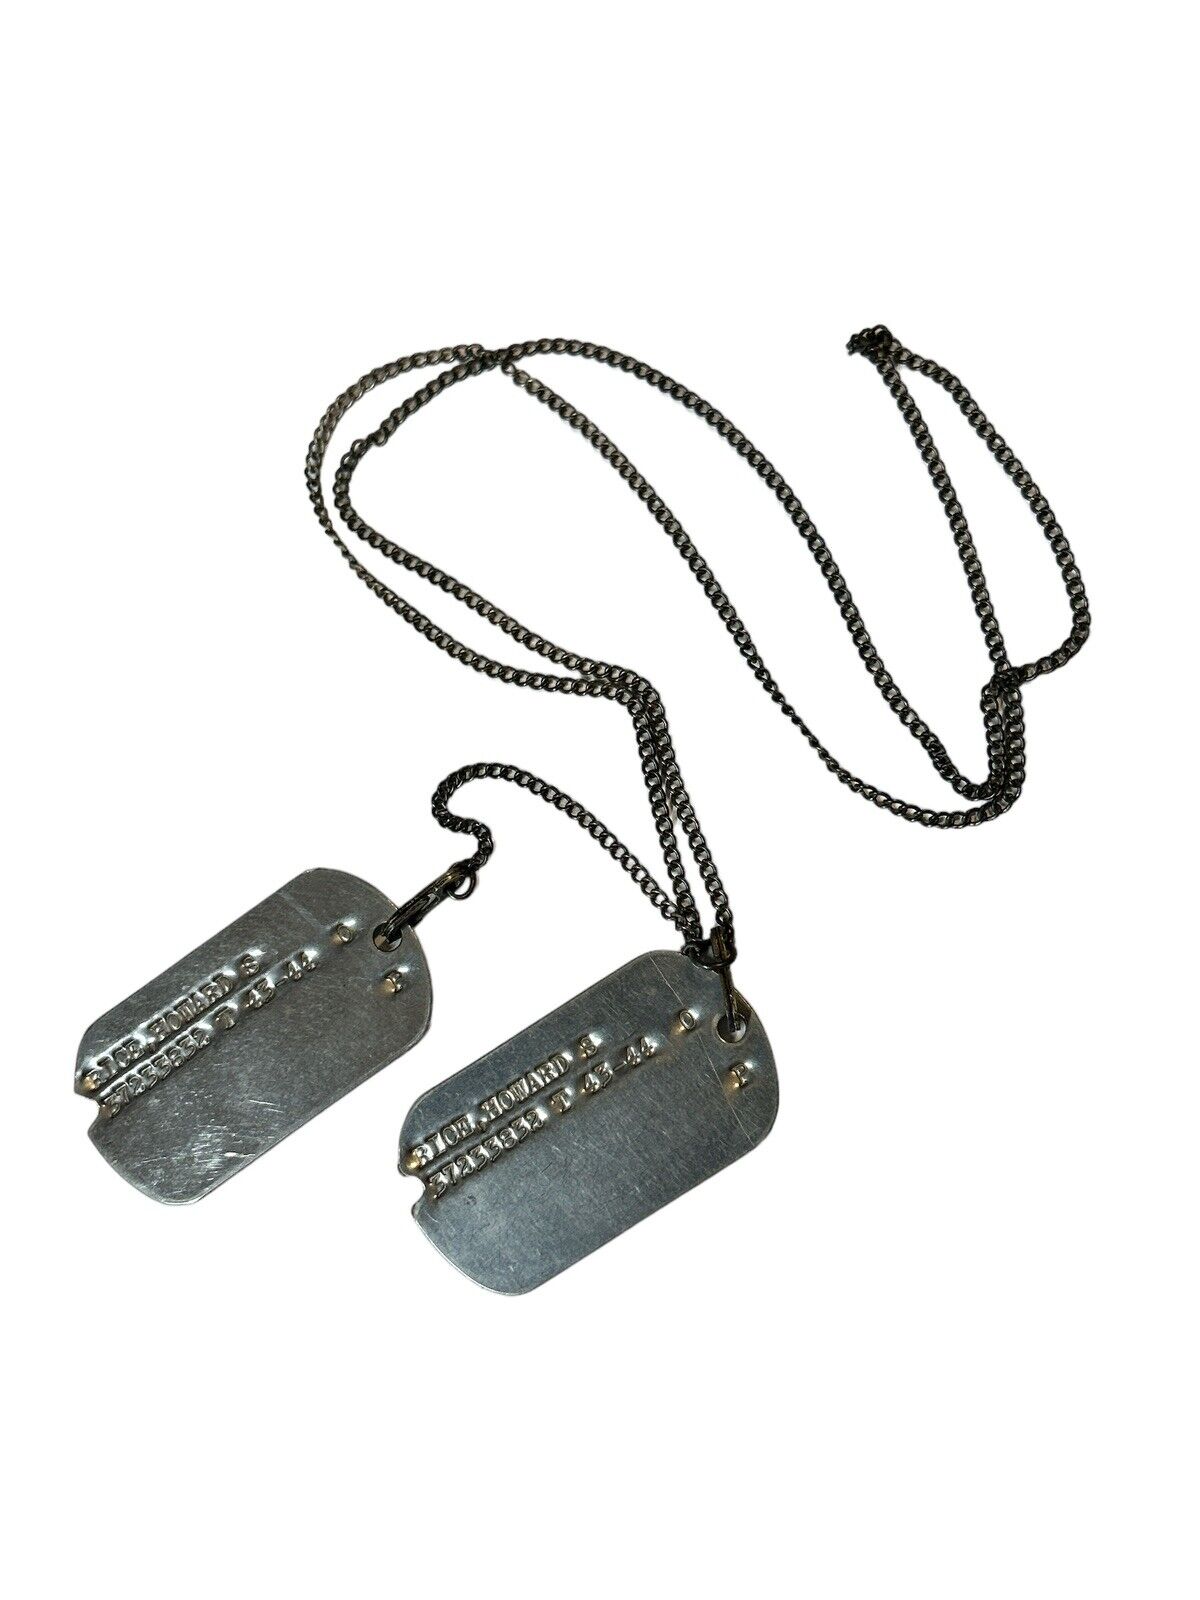 Authentic WW2 ARMY Double Dog Tag Notched 43-44 Draftee 7th Corps Original Chain